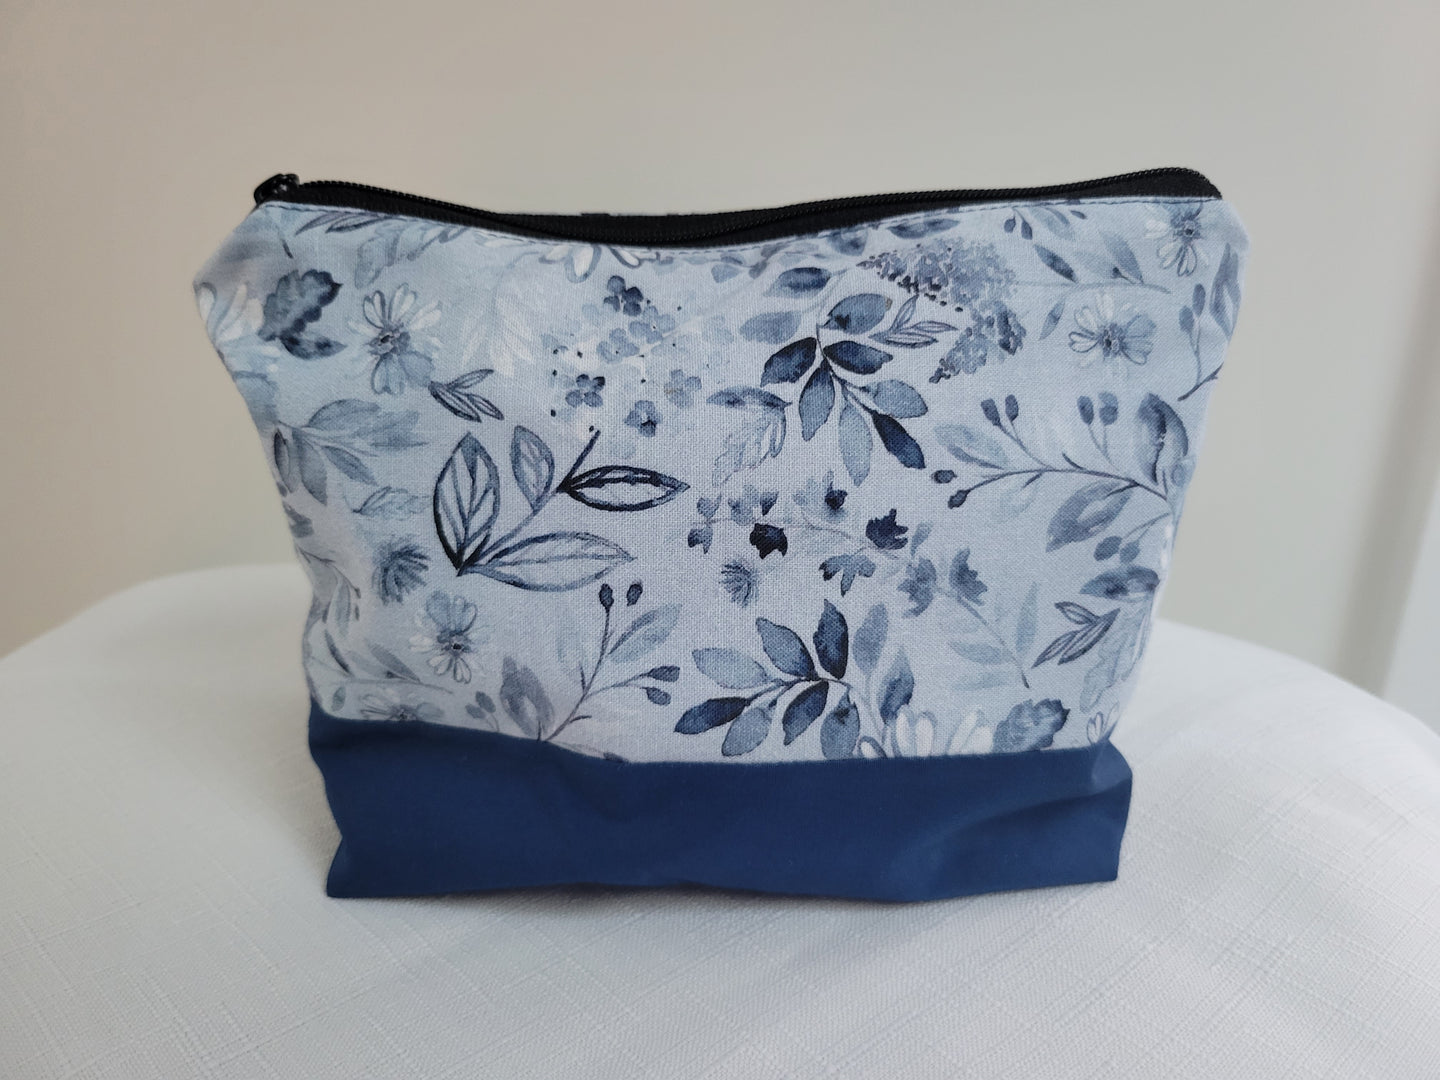 In the Blue Essential Pouch